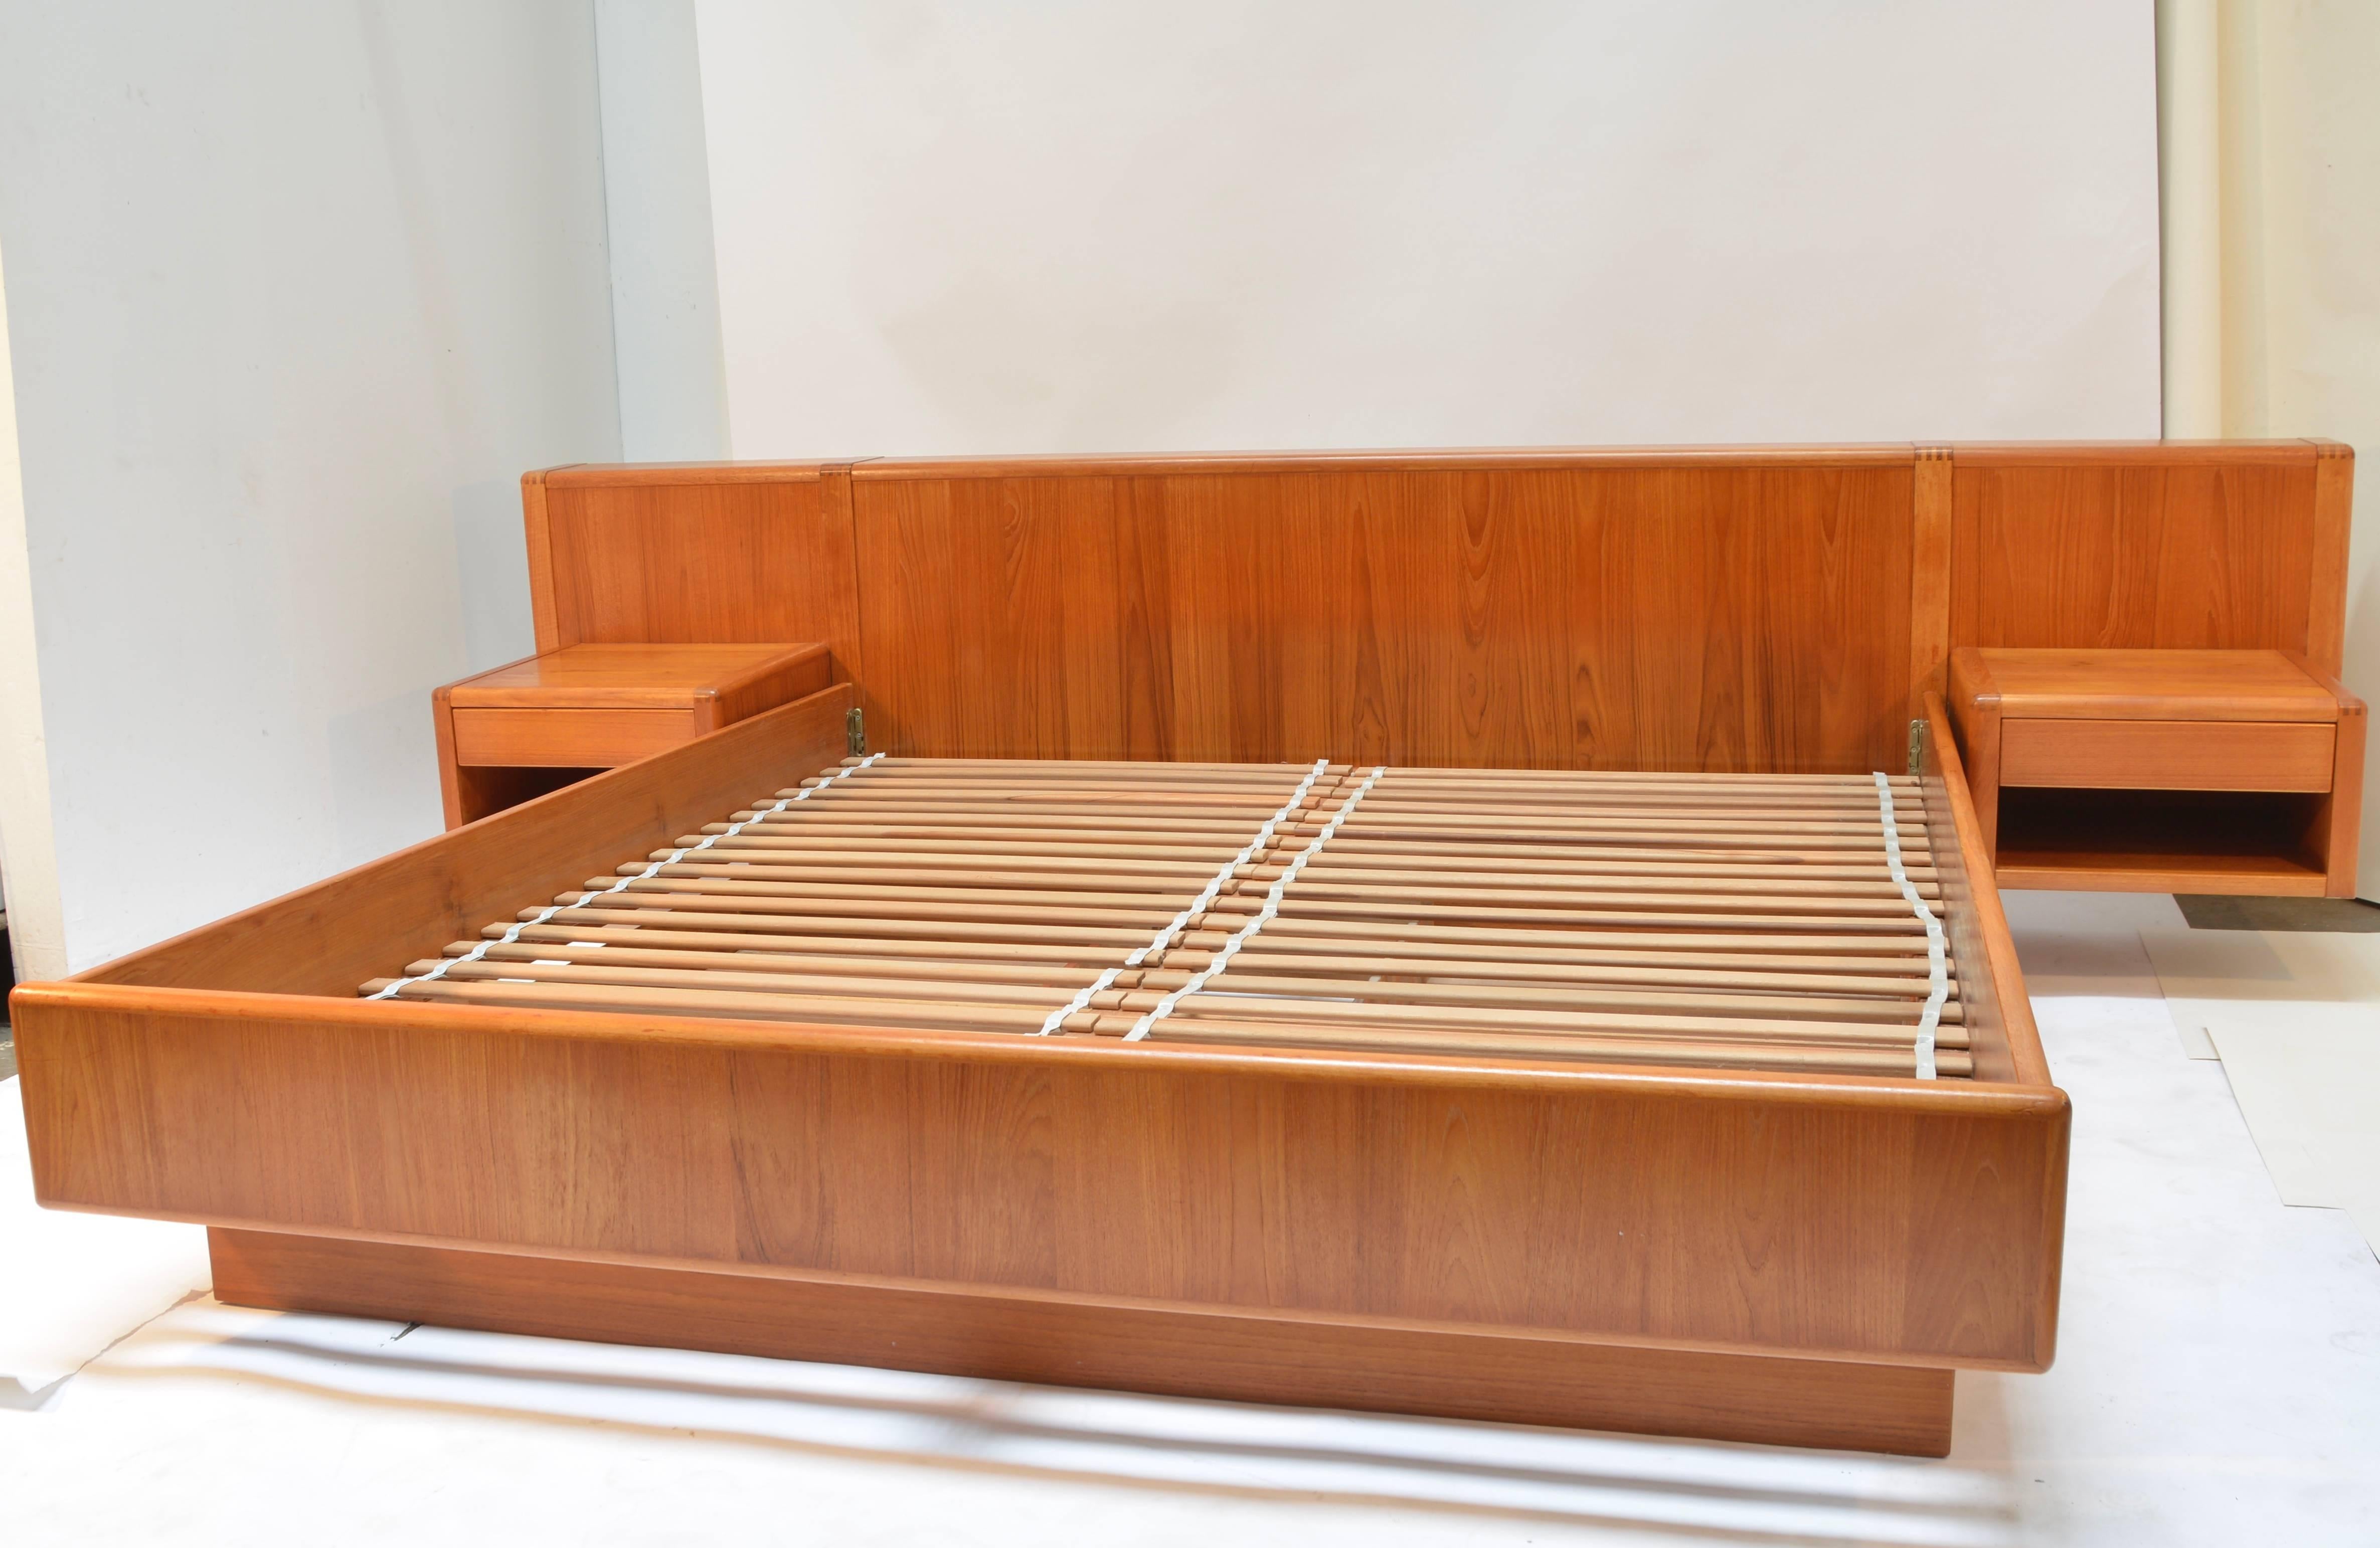 Nordisk designed 1980s teak platform beds with floating nightstands. This piece features two sliding drawers underneath the bed frame for extra storage. 

Bed size 72 Wide by 84 Long.
 